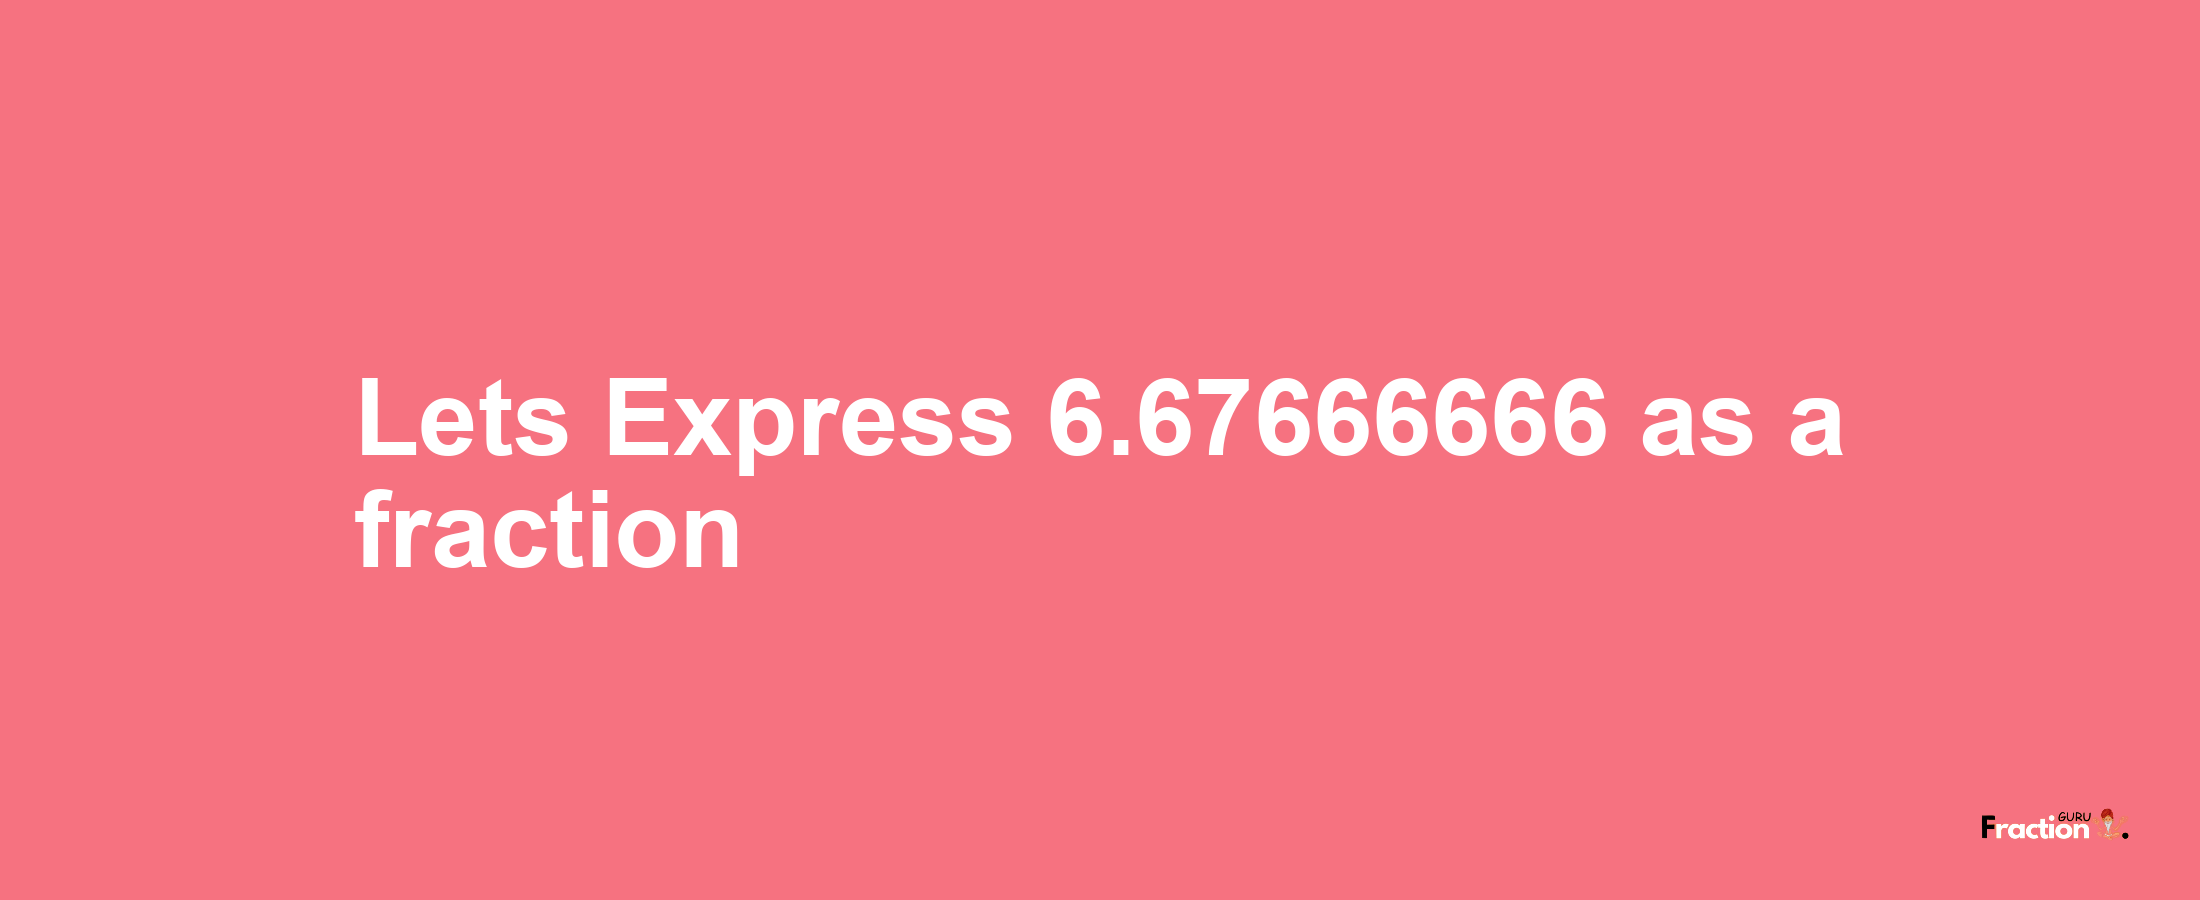 Lets Express 6.67666666 as afraction